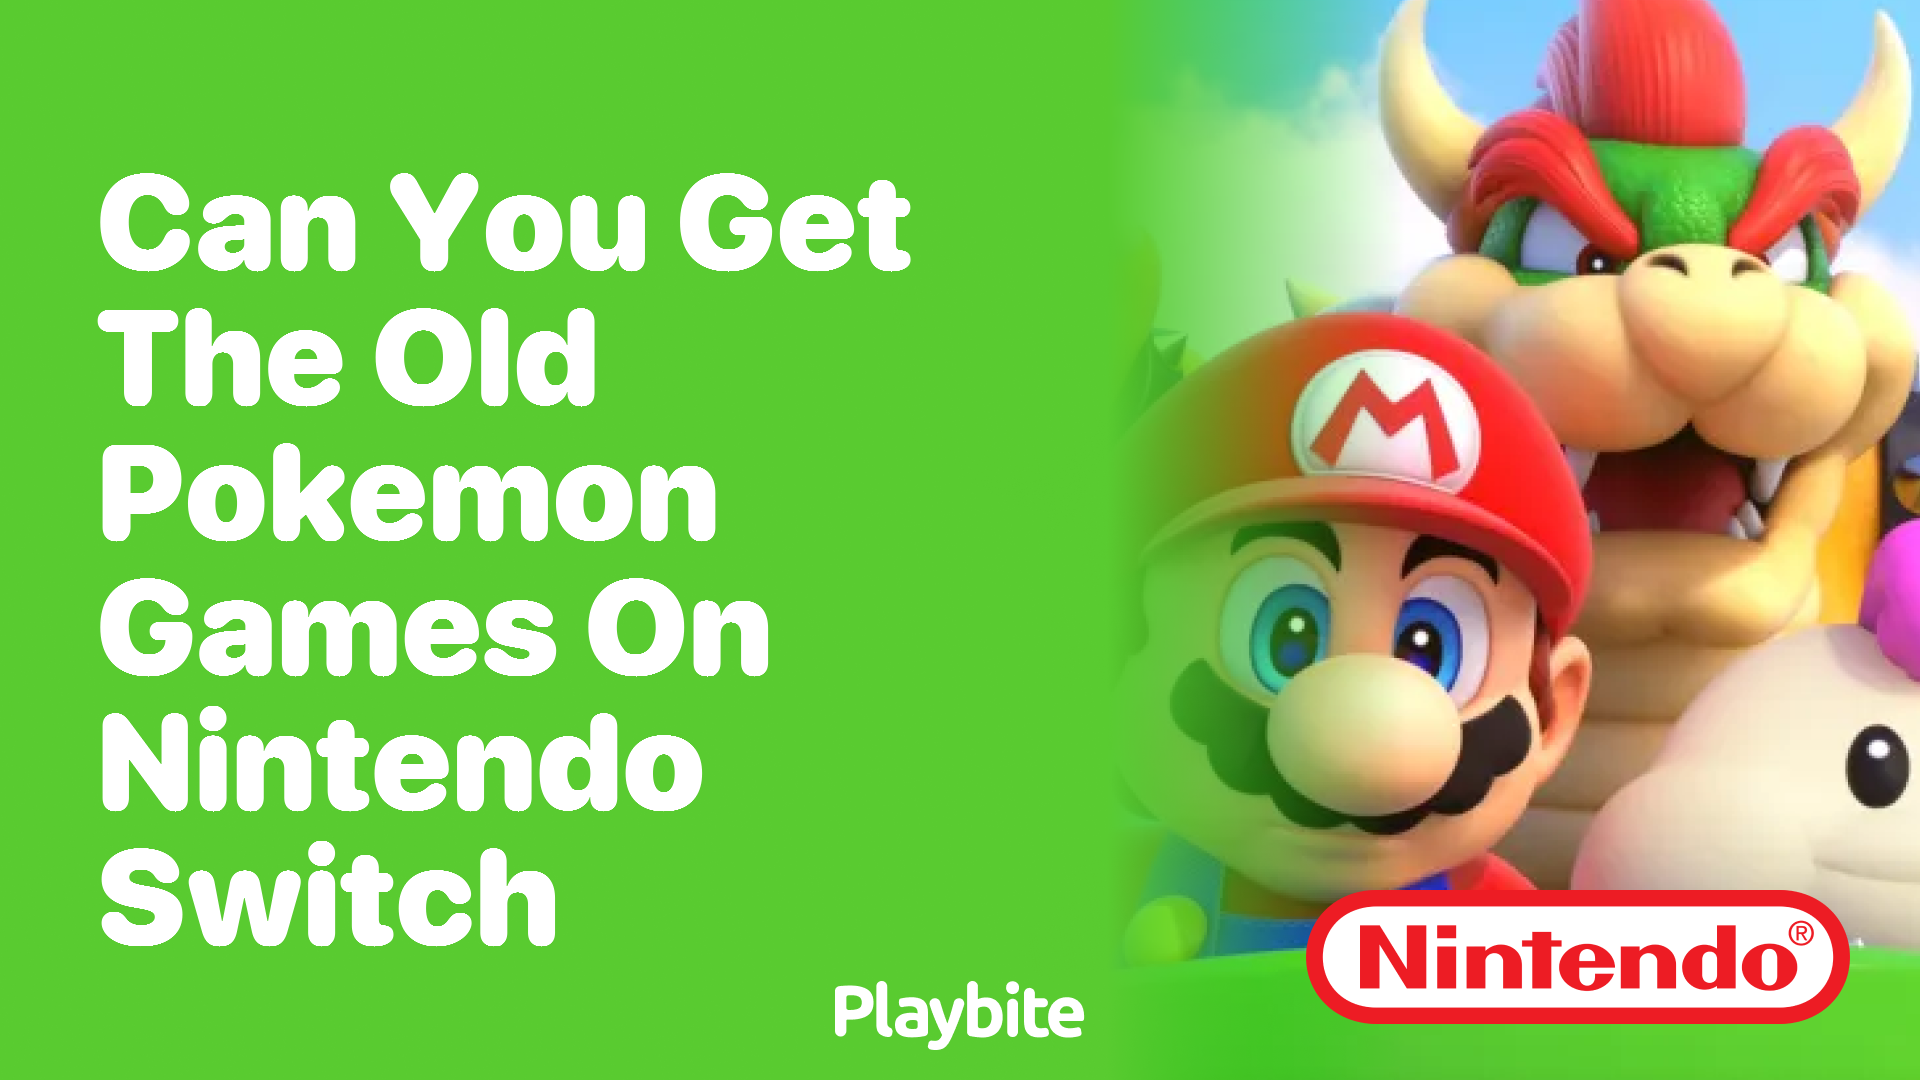 Can You Get the Old Pokemon Games on Nintendo Switch?